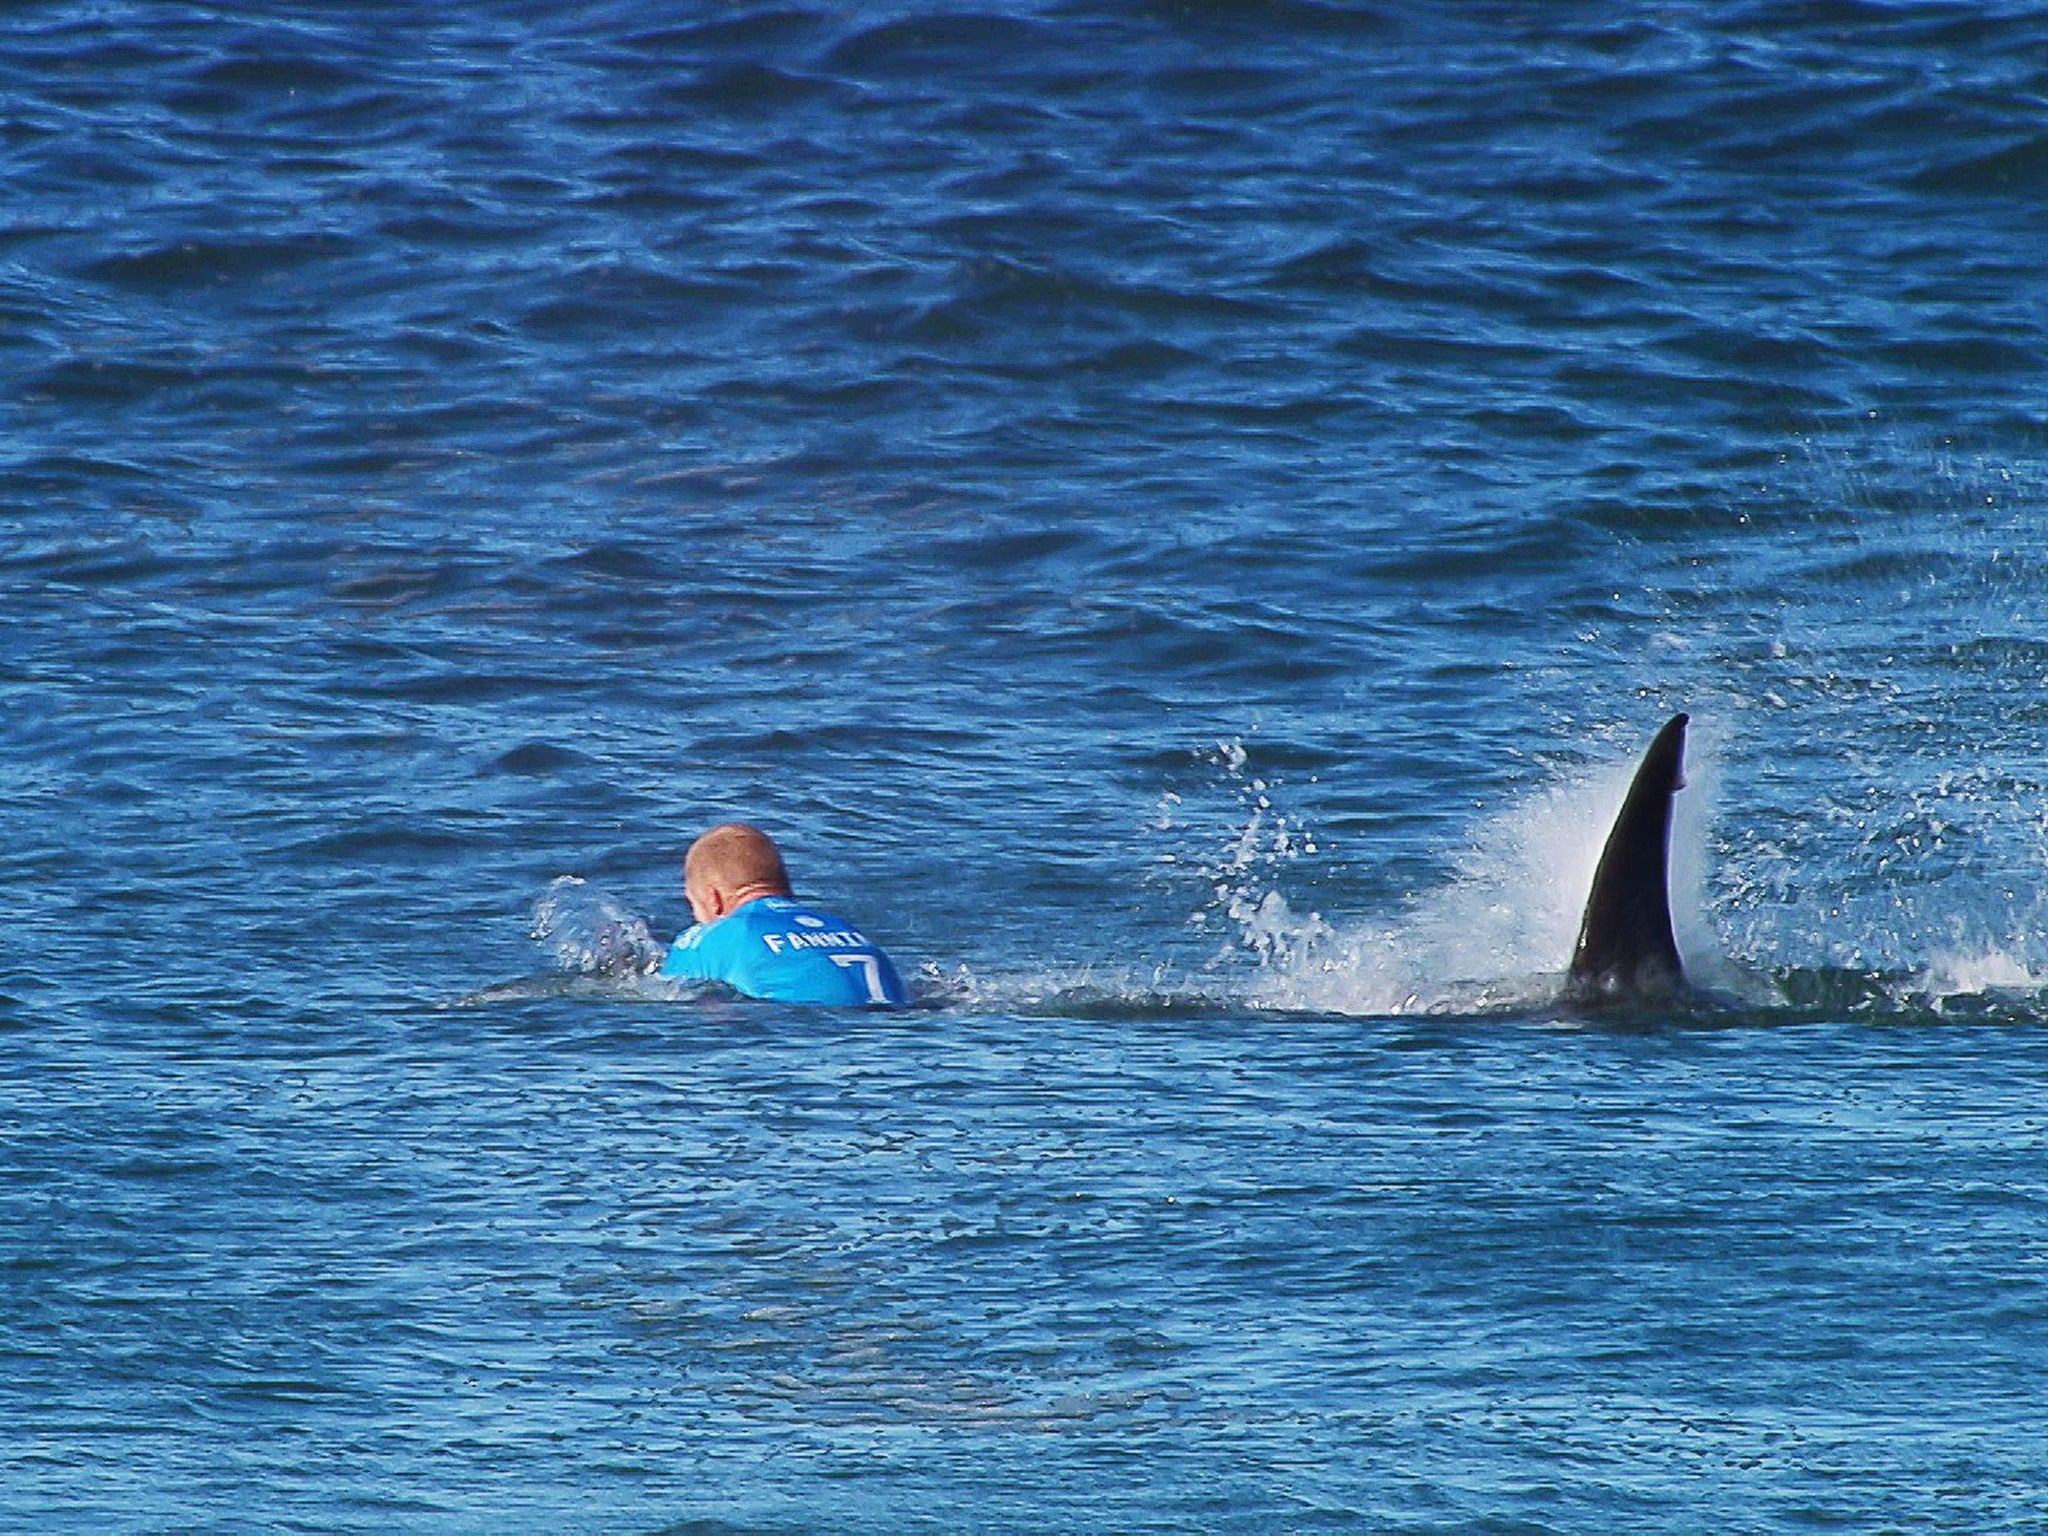 Mick Fanning escaped from a shark in the final round of the JBay Open surfing event